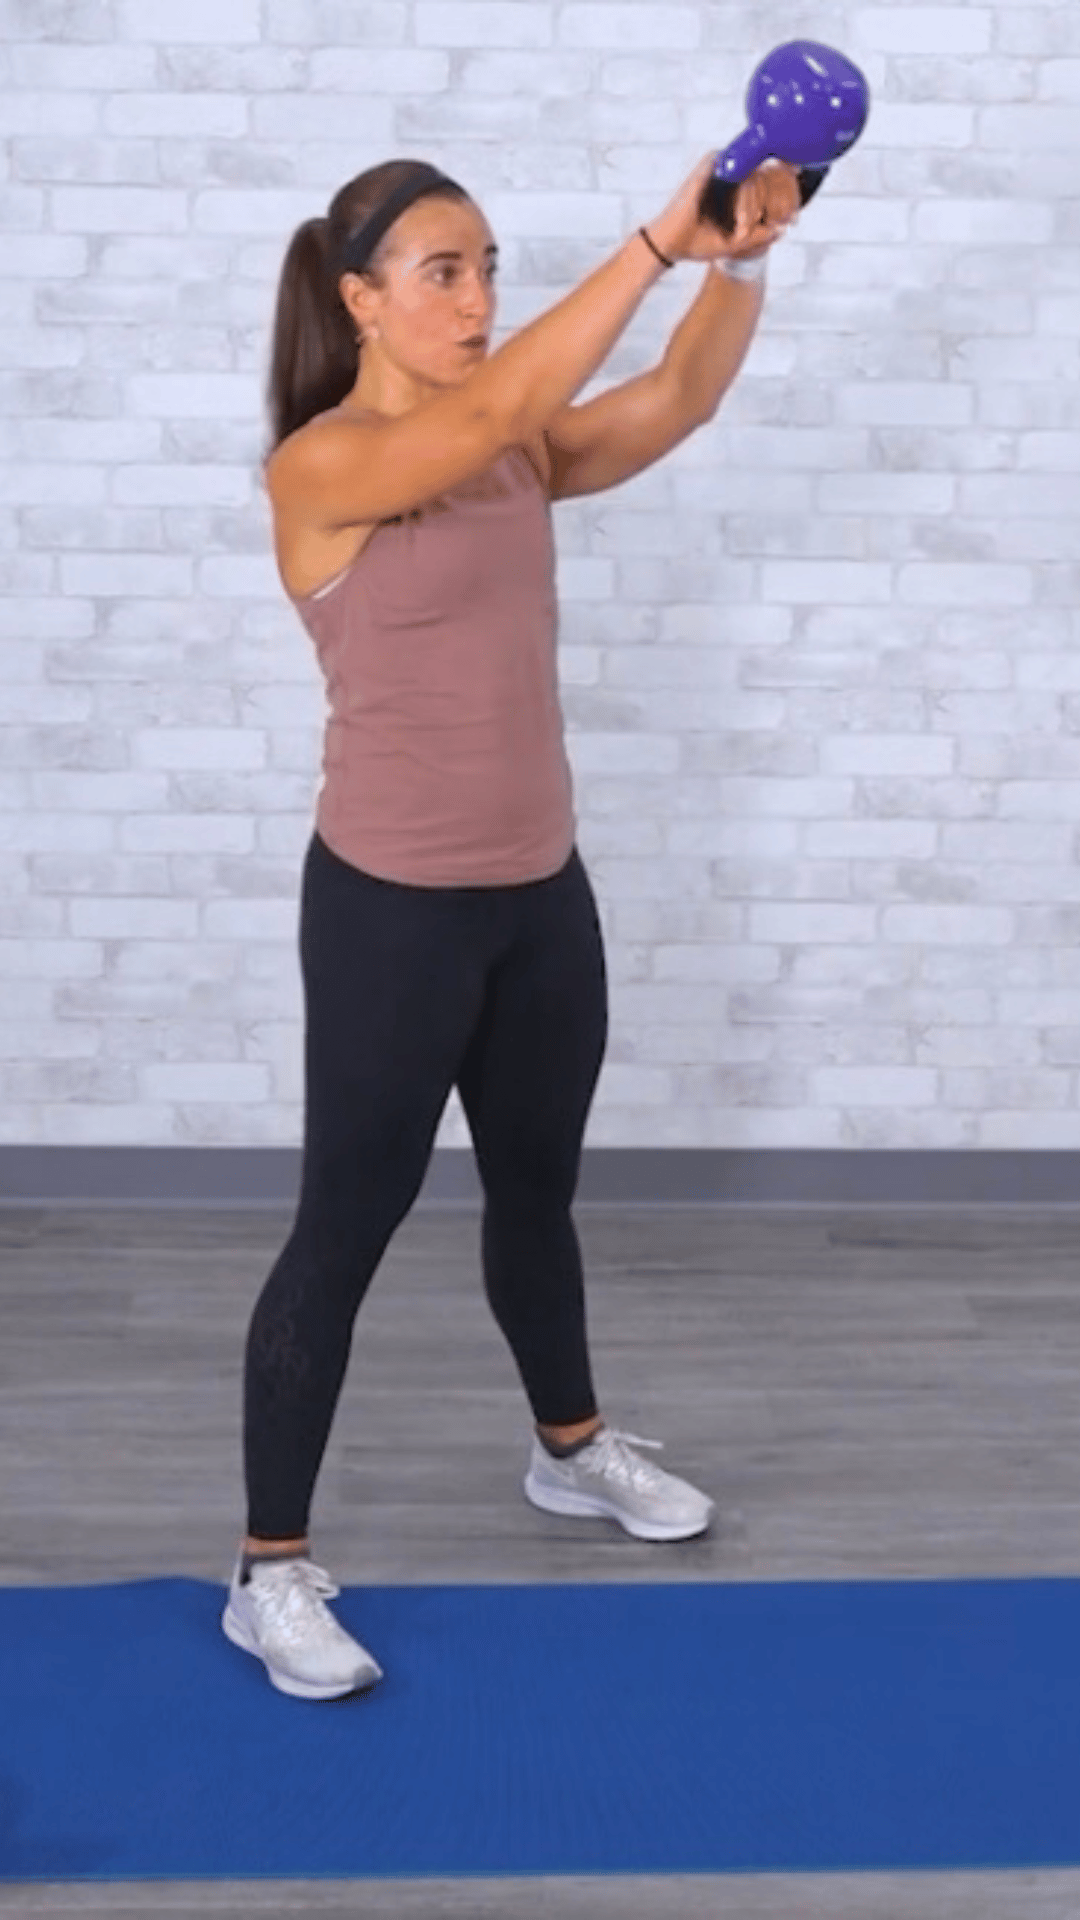 Kettlebell Workout Program for Cardio and Strength Gains